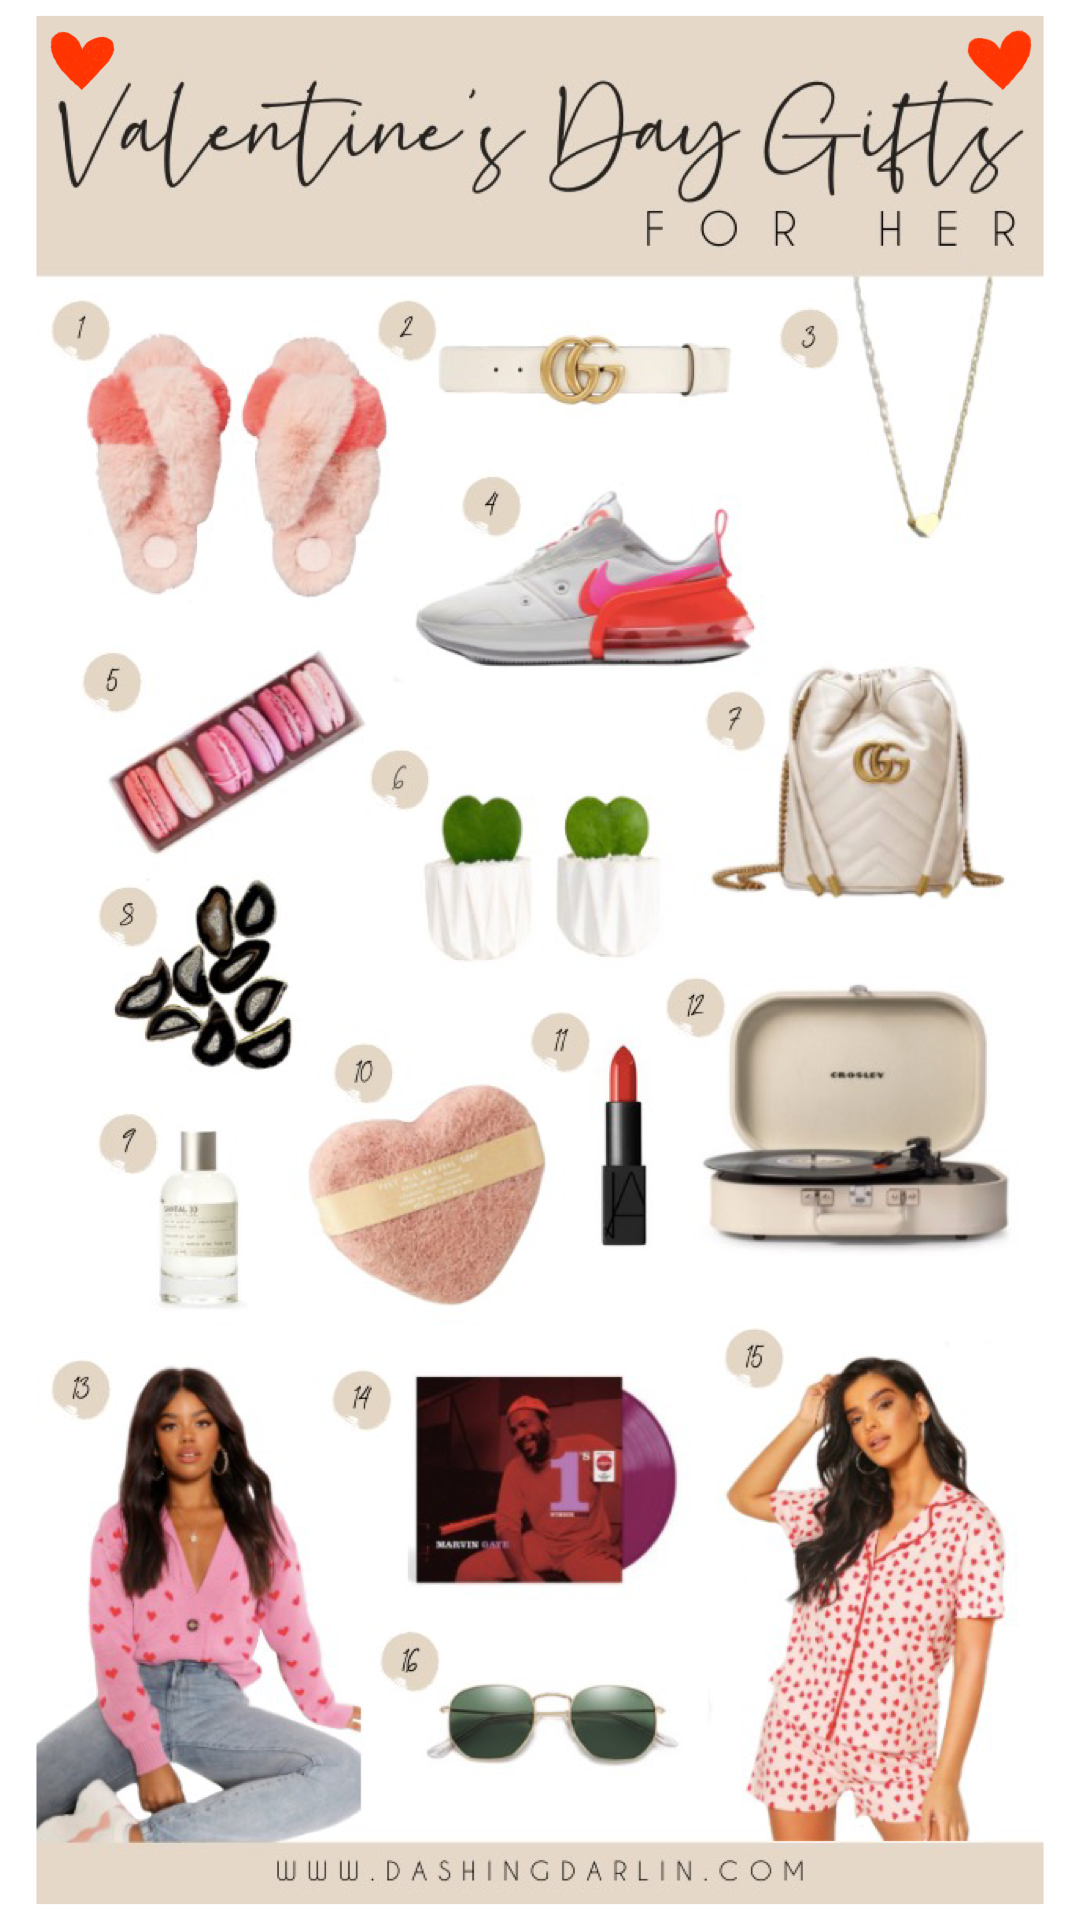 BEST VALENTINE'S DAY GIFT IDEAS FOR THE GUYS & LADIES~ FROM COLOGNE/PERFUME TO ATHLETIC CLOTHES TO DESIGNER HANDBAGS, I ROUNDED UP MY FAVORITE PICKS. SEE MORE ON THE BLOG.